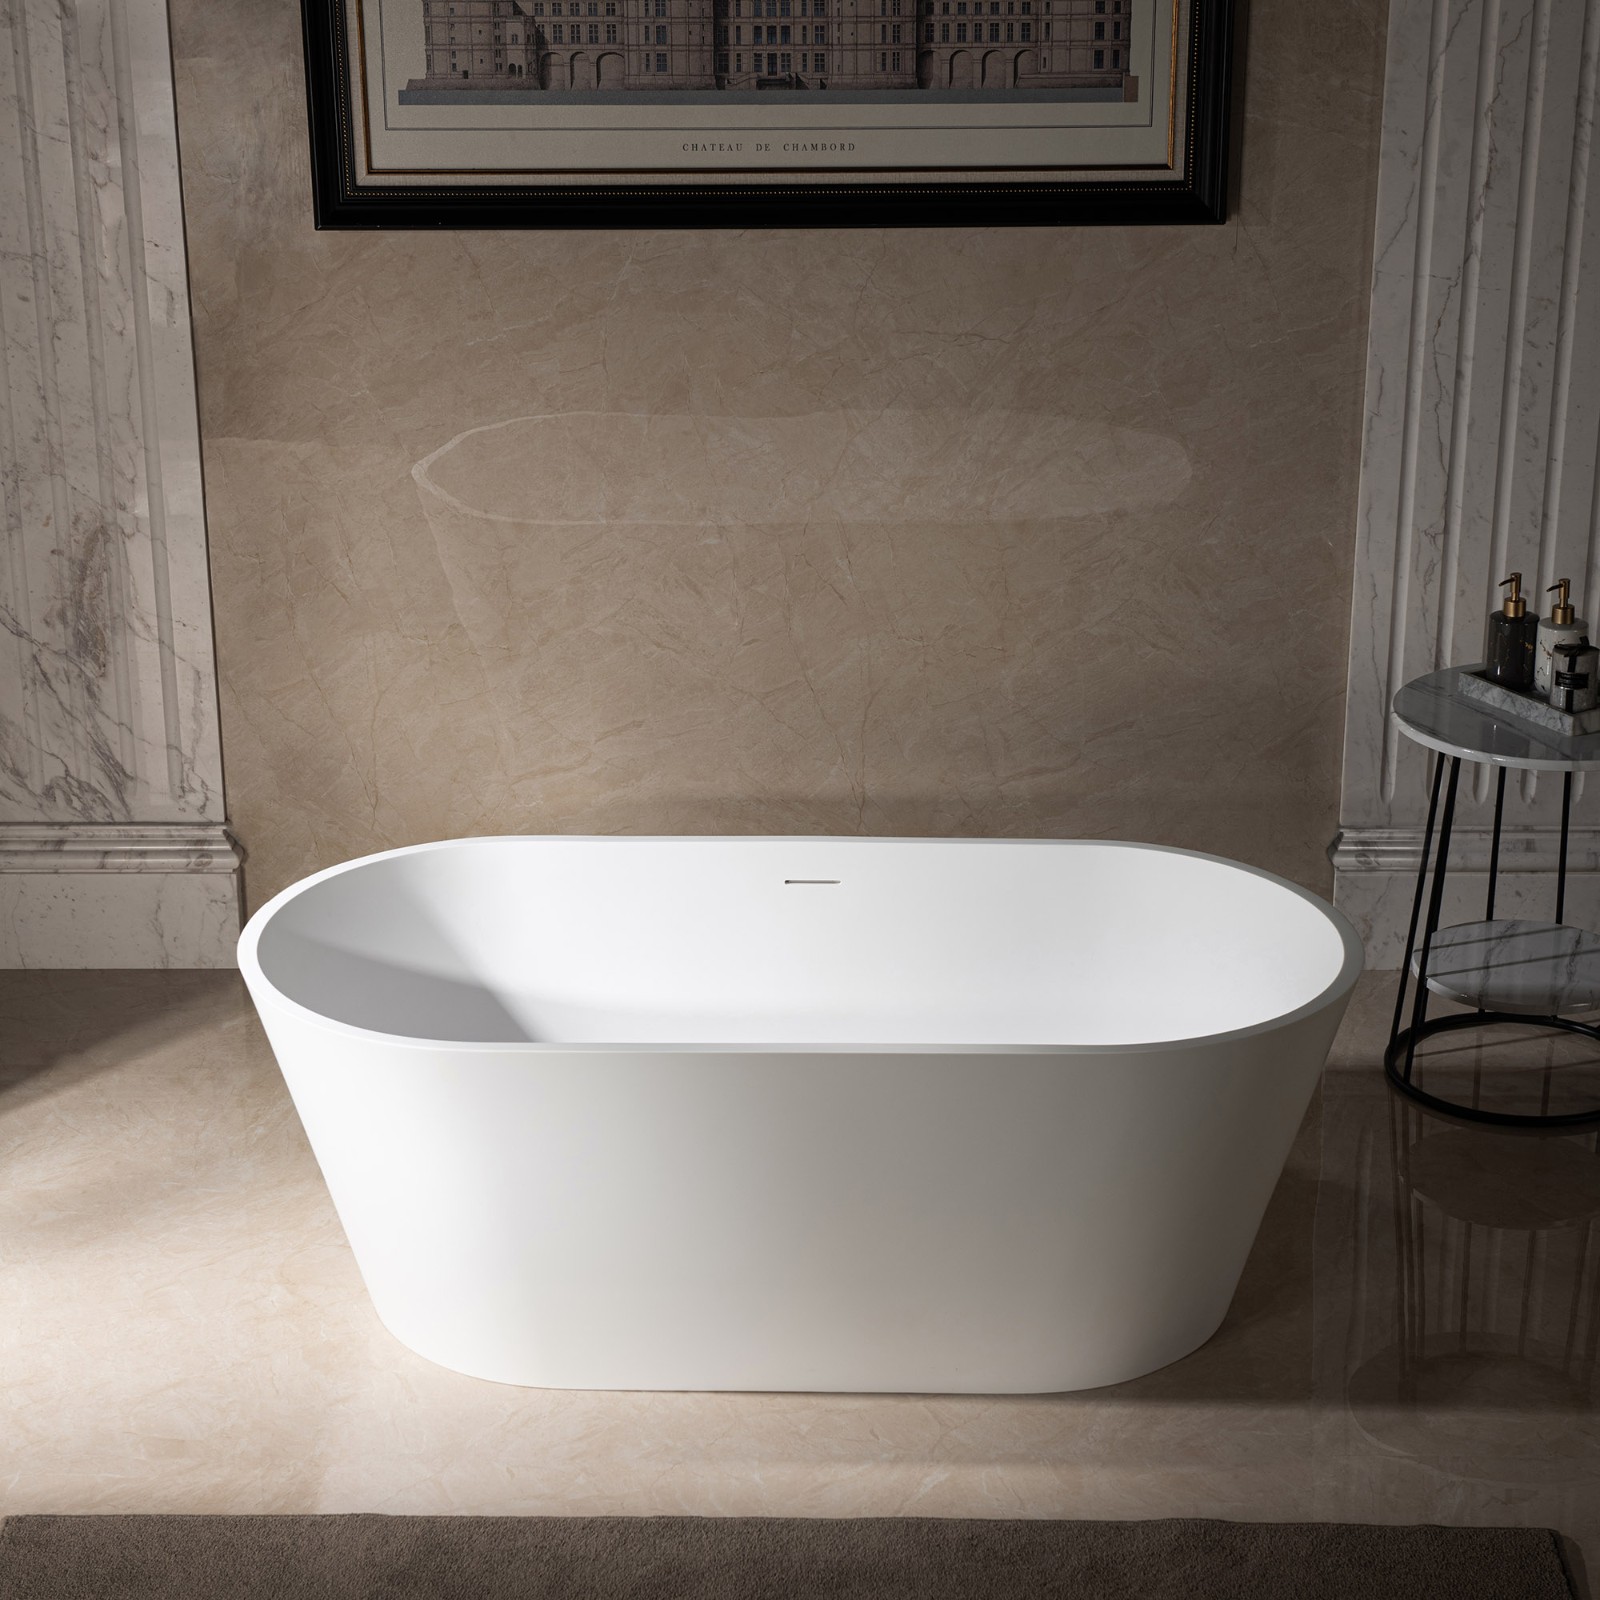  WOODBRIDGE 59 in. x 29 in. Luxury Contemporary Solid Surface Freestanding Bathtub in Matte White_643